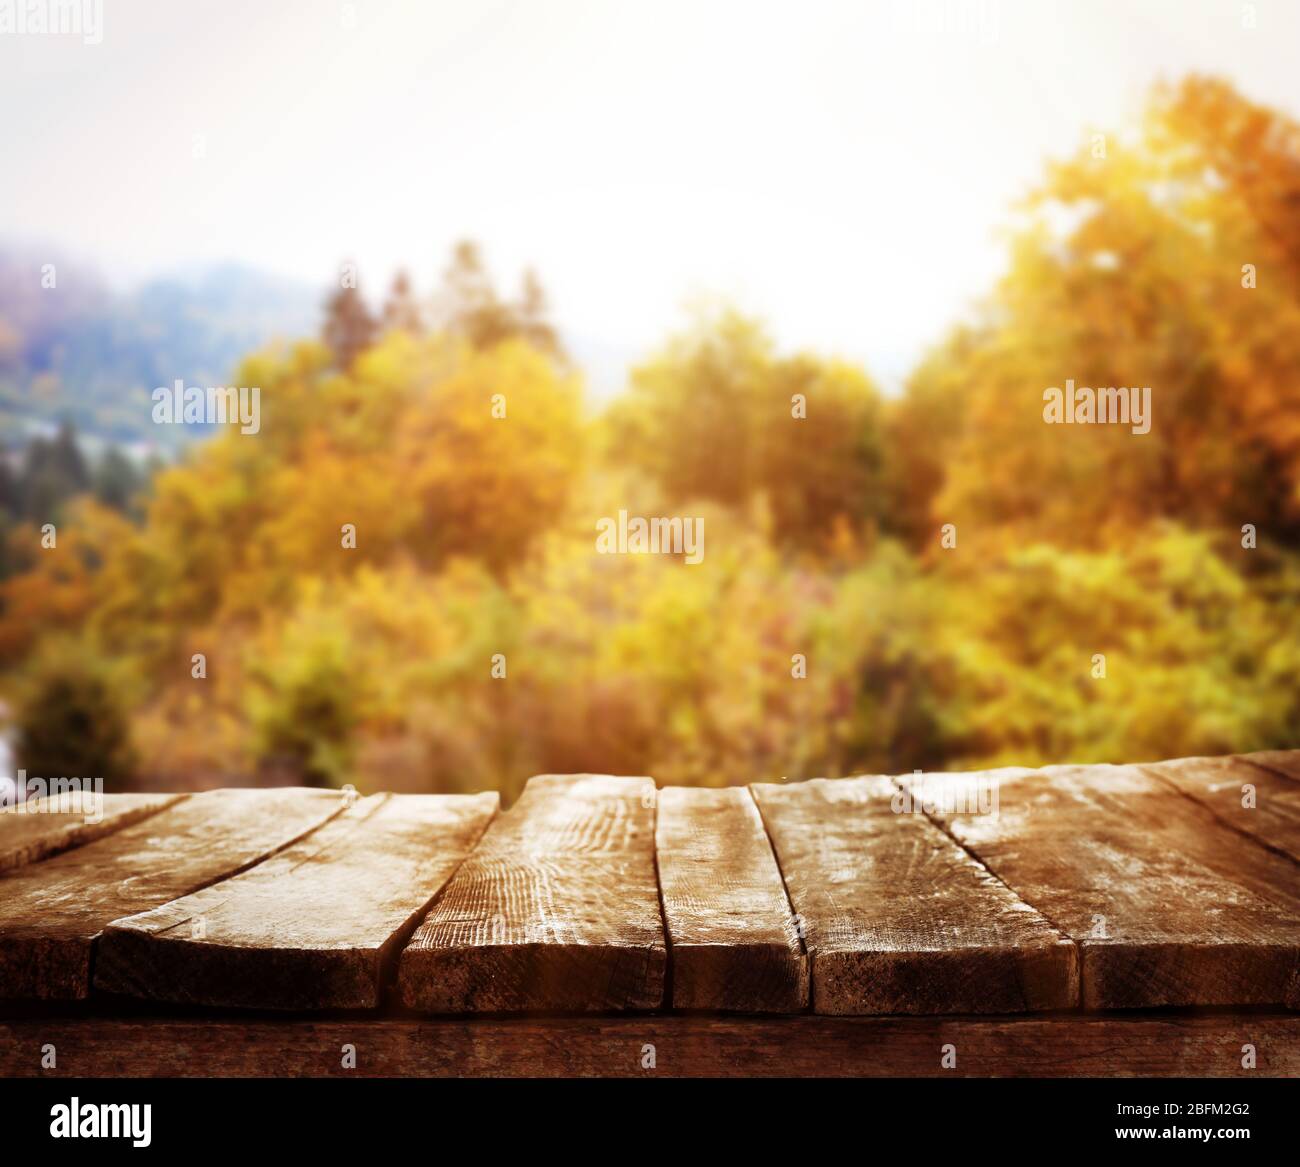 Beautiful nature background with wooden floor Stock Photo - Alamy